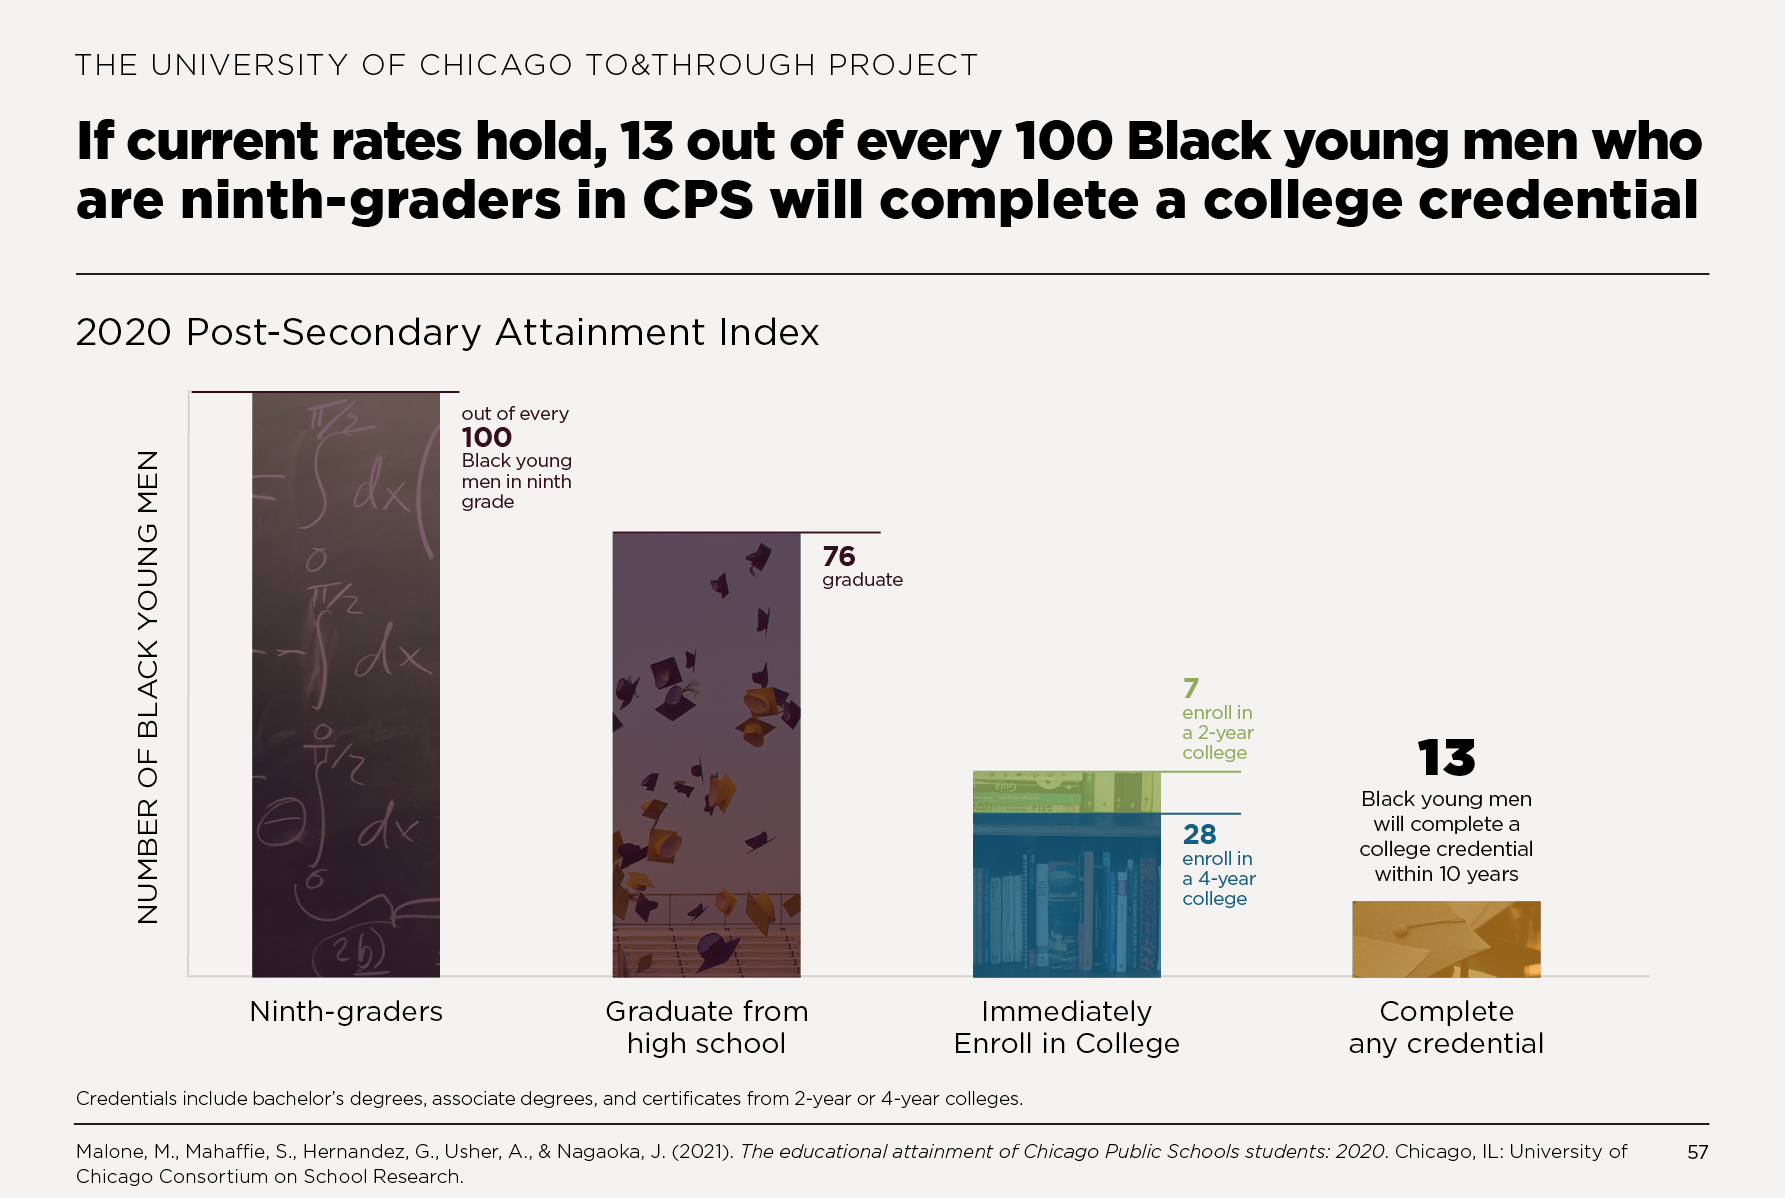 If current rates hold, 13 out of every 100 Black young men who are ninth-graders in CPS will complete a college credential within 10 years